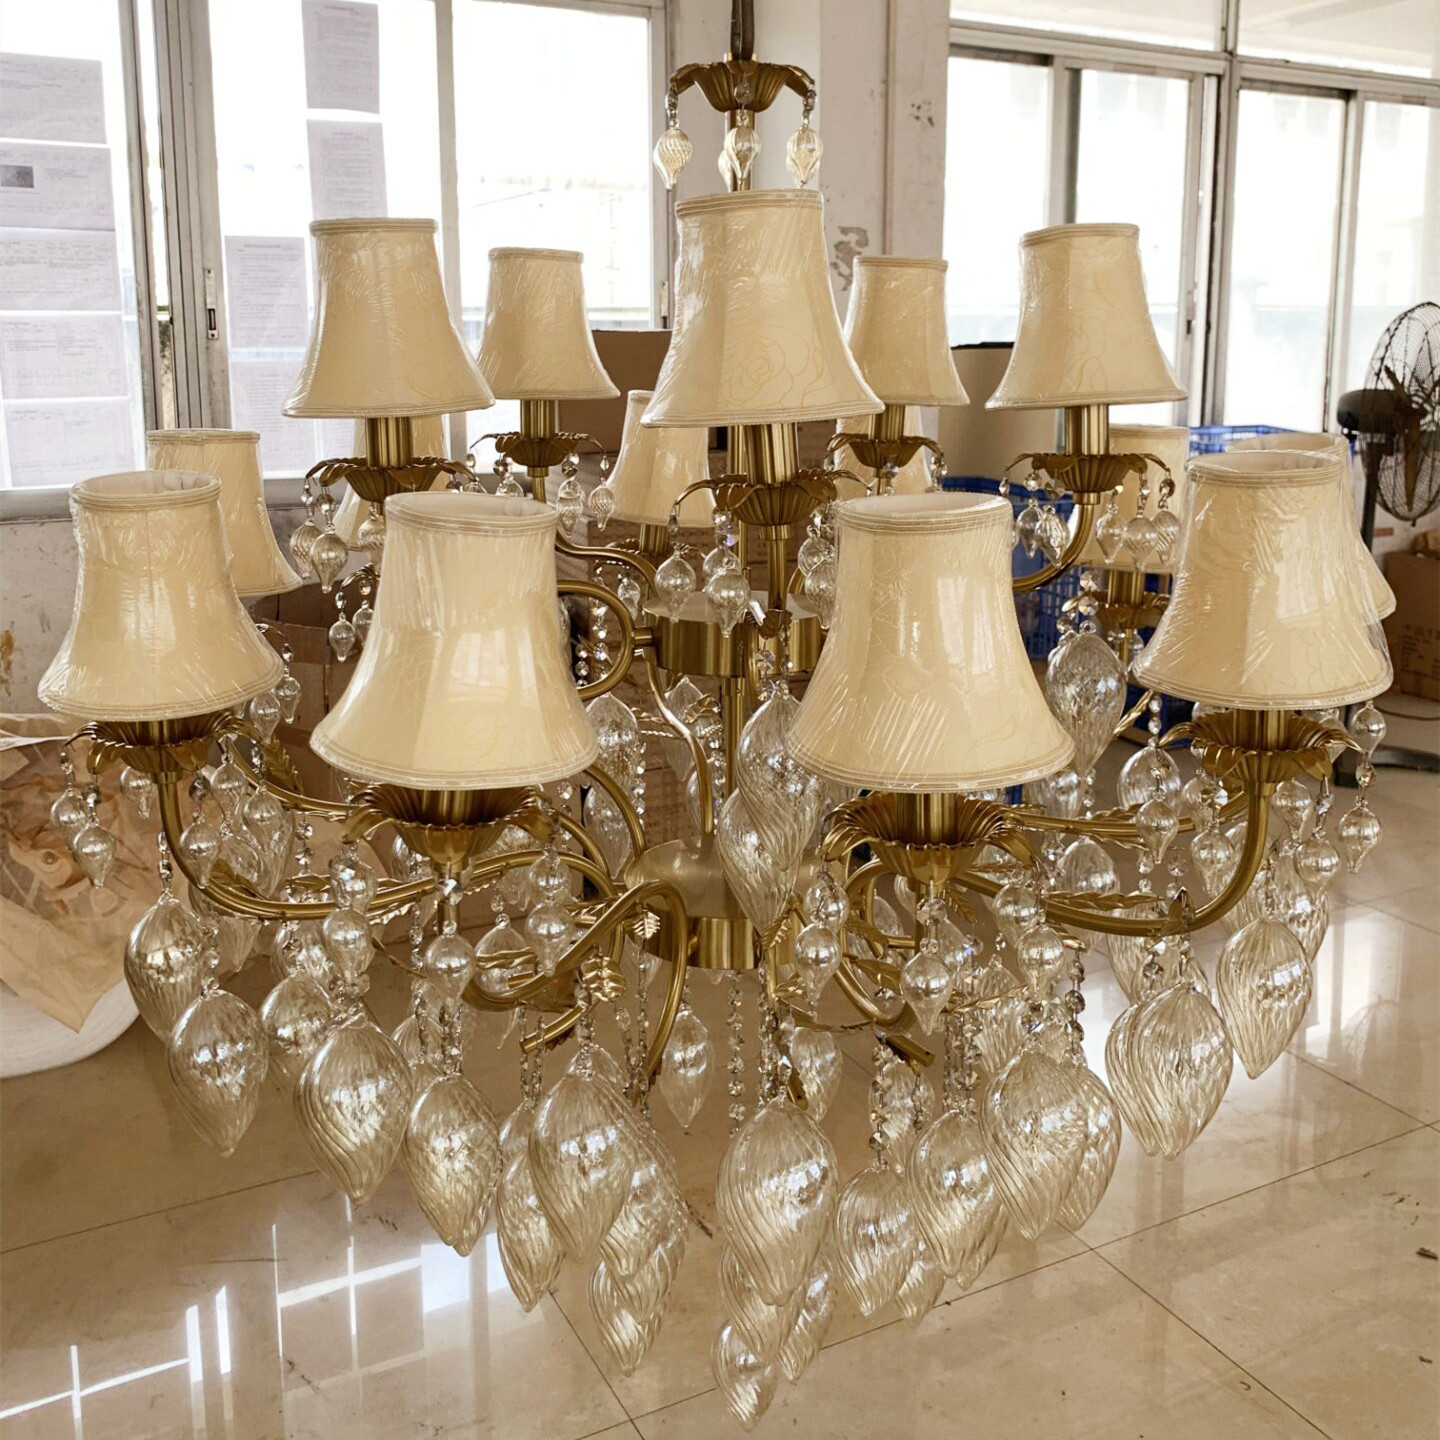 Become the Chandelier Experts